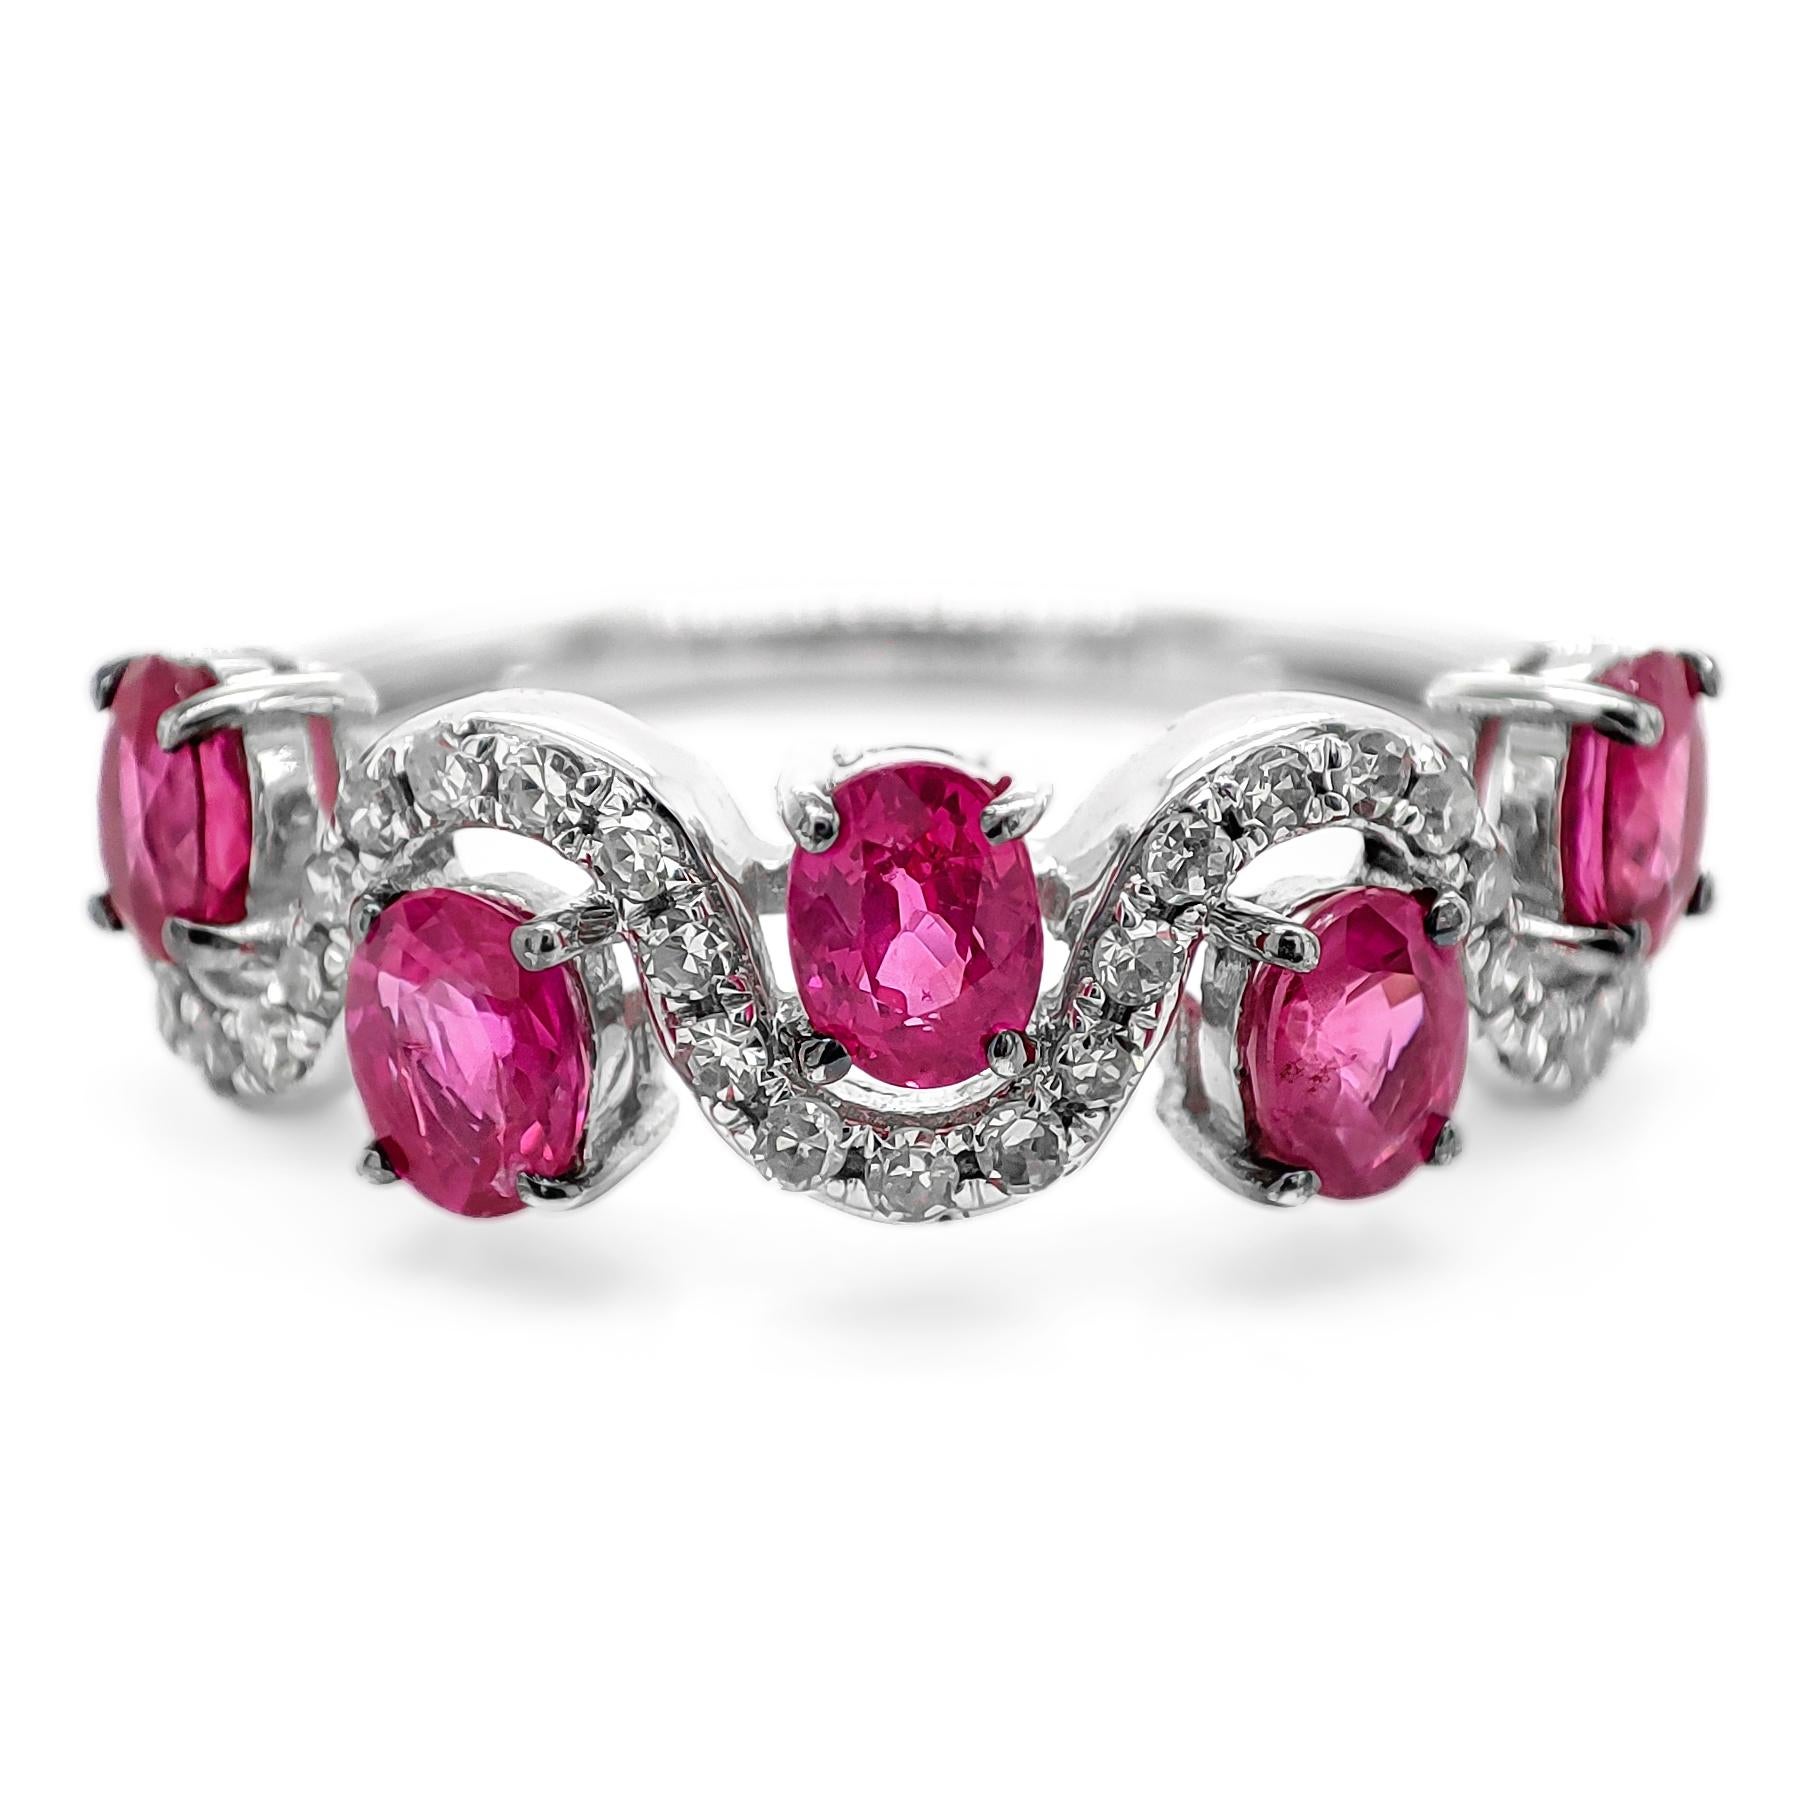 FOR US BUYER NO VAT

You've described a stunning ring featuring five oval-shaped red rubies with a total weight of 1.35 carats. These vibrant rubies are the centerpiece of the design, exuding their rich and passionate red hue.

The rubies are